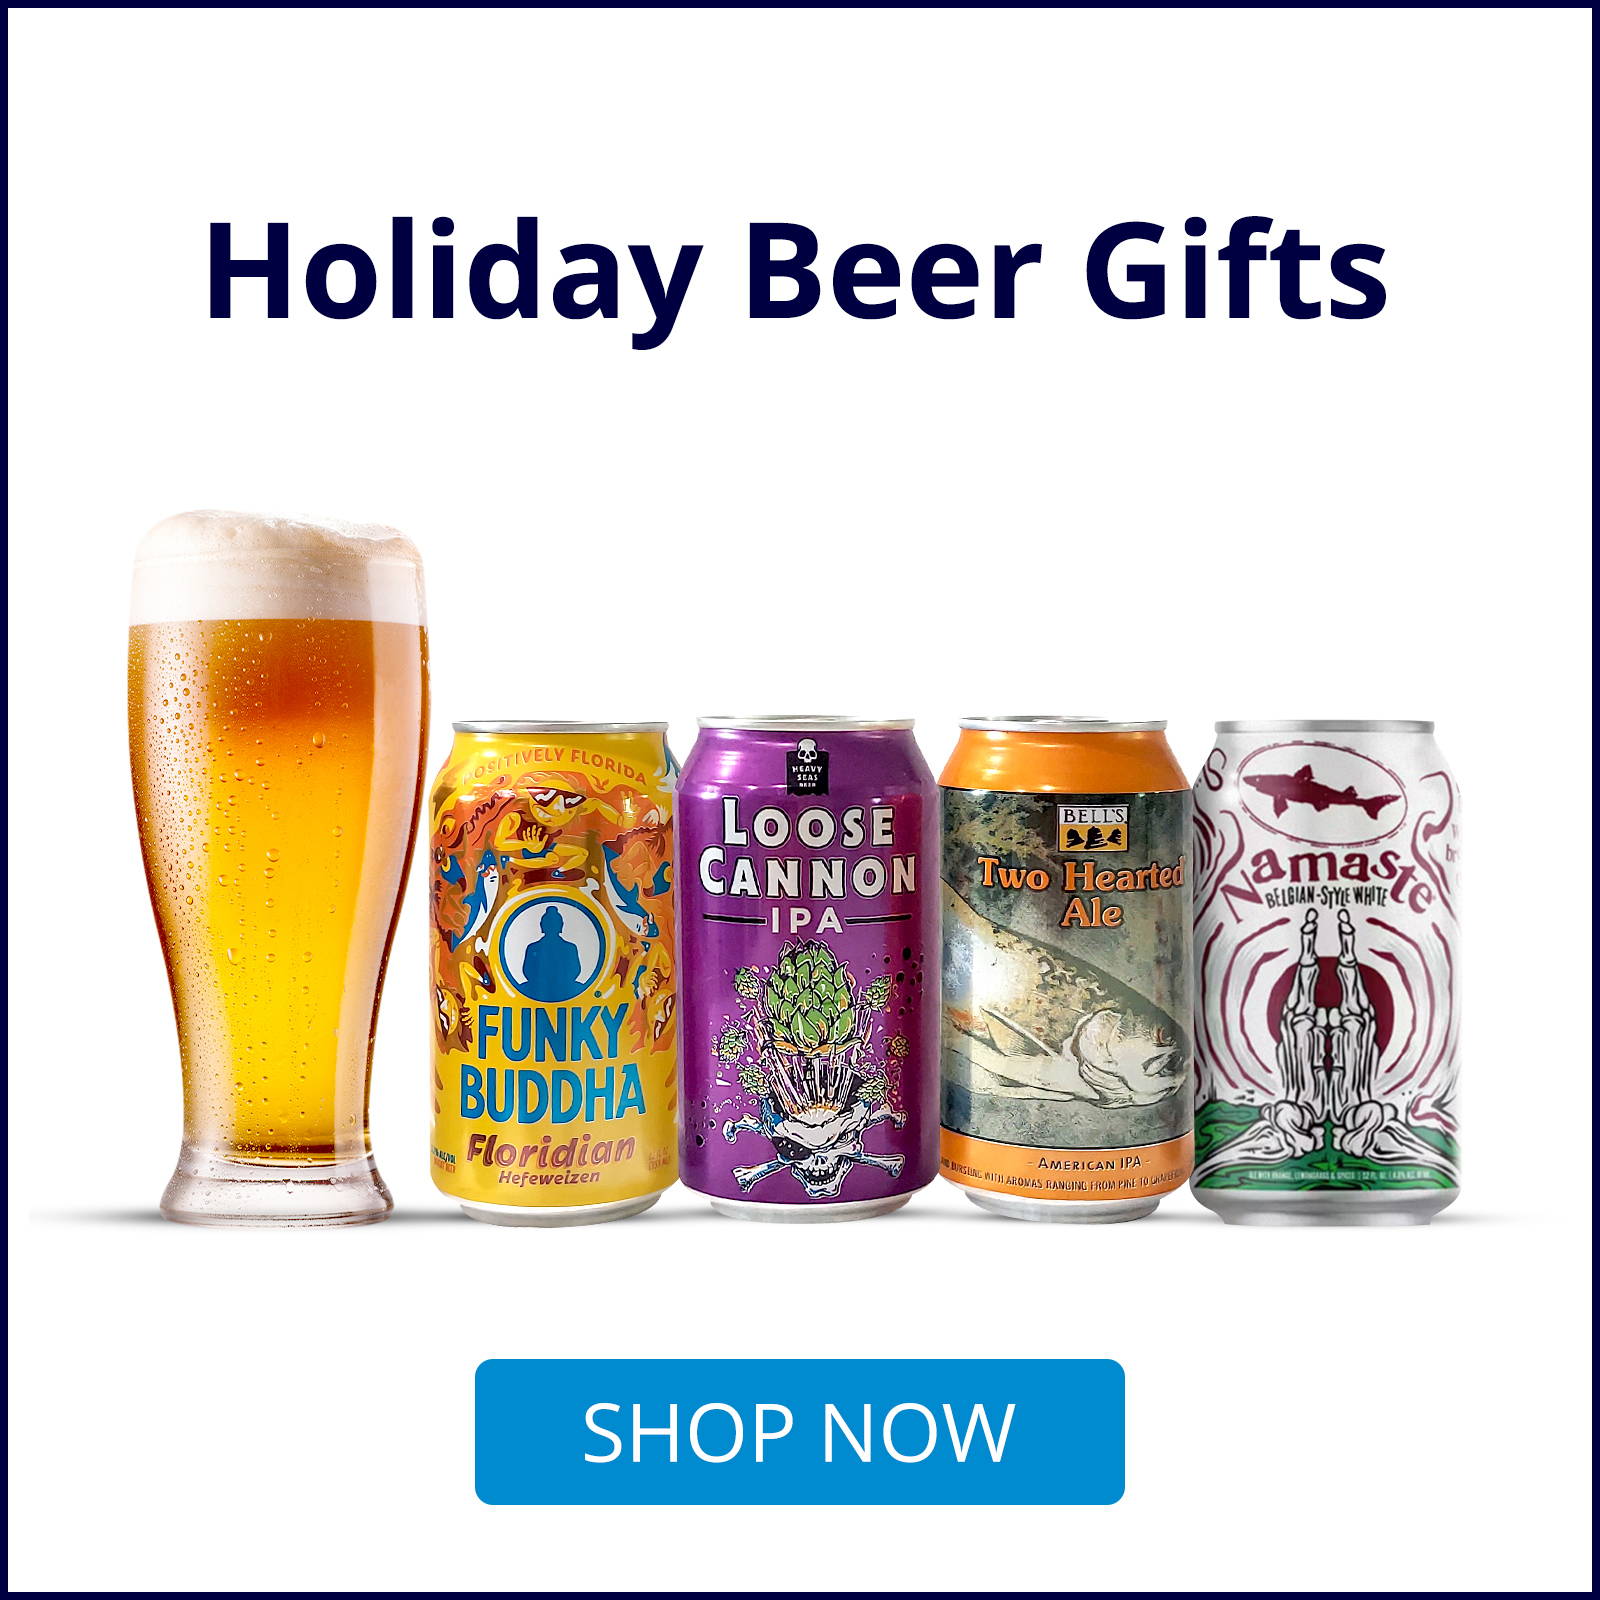 Holiday Beer Gifts